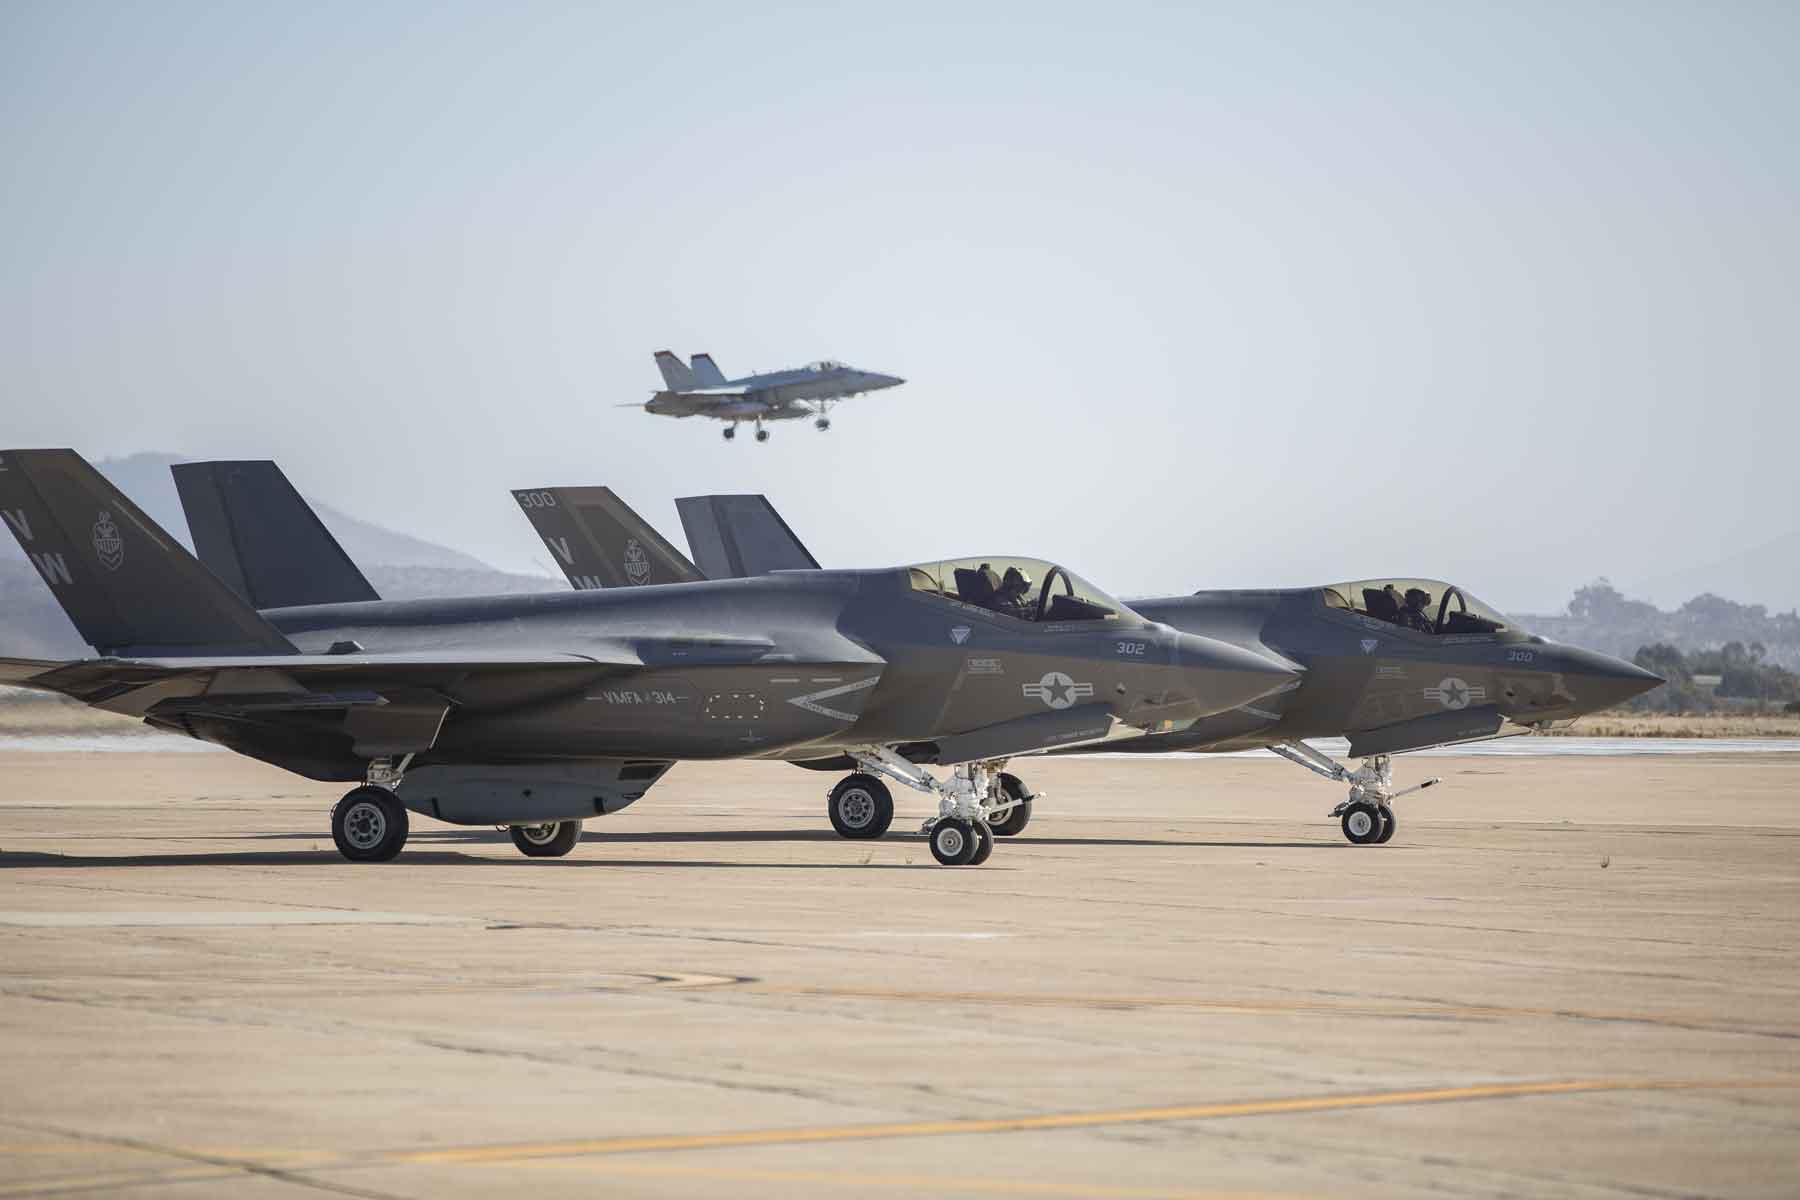 US Marine Corps forms second squadron of F-35C Lightning II fifth-generation fighters